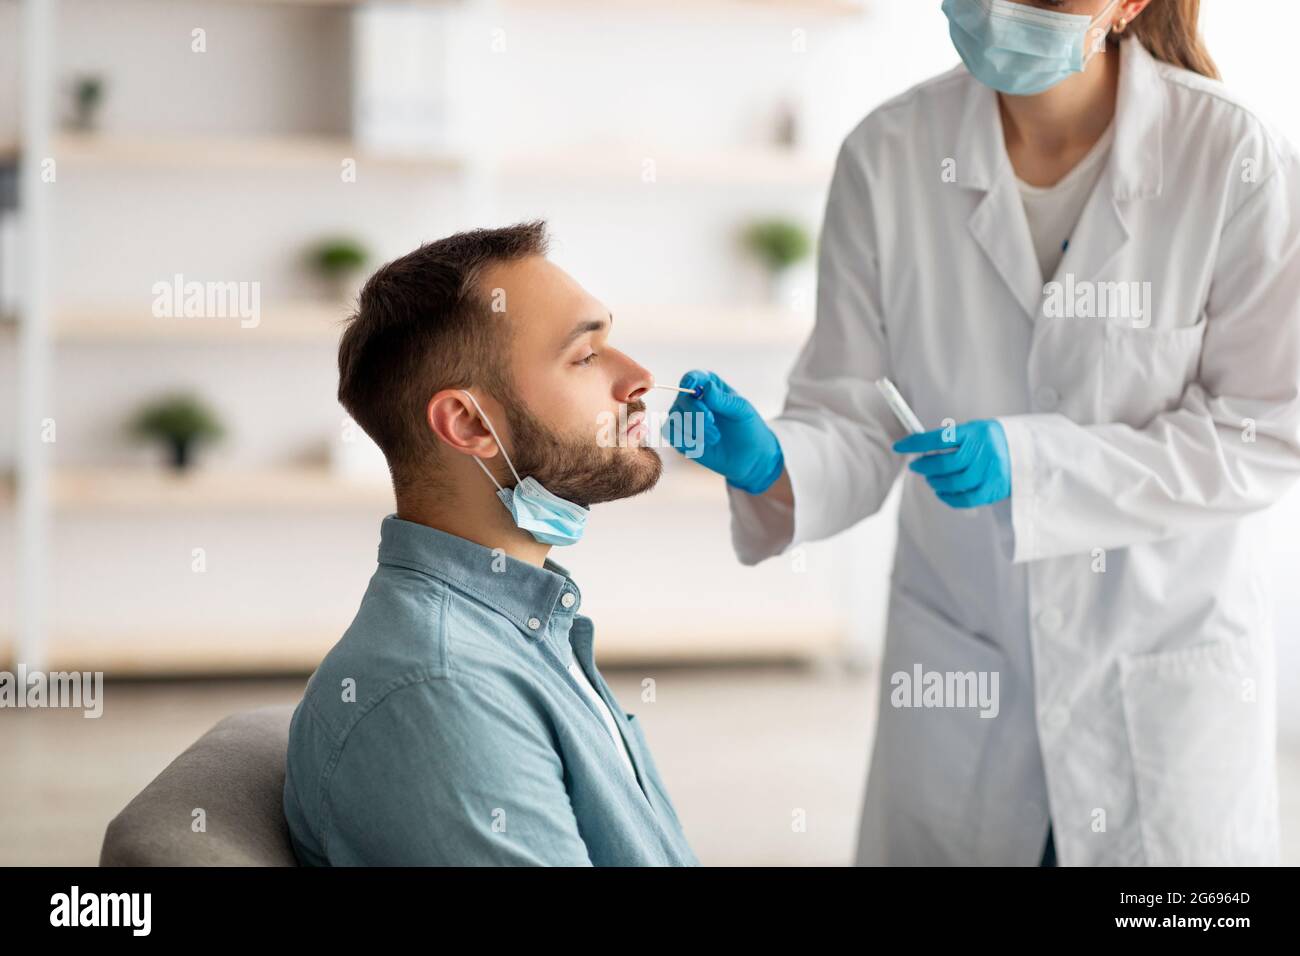 Covid diagnostic procedure. Doctor making nasal PCR test for young Caucasian man, using sterile swab stick at home Stock Photo